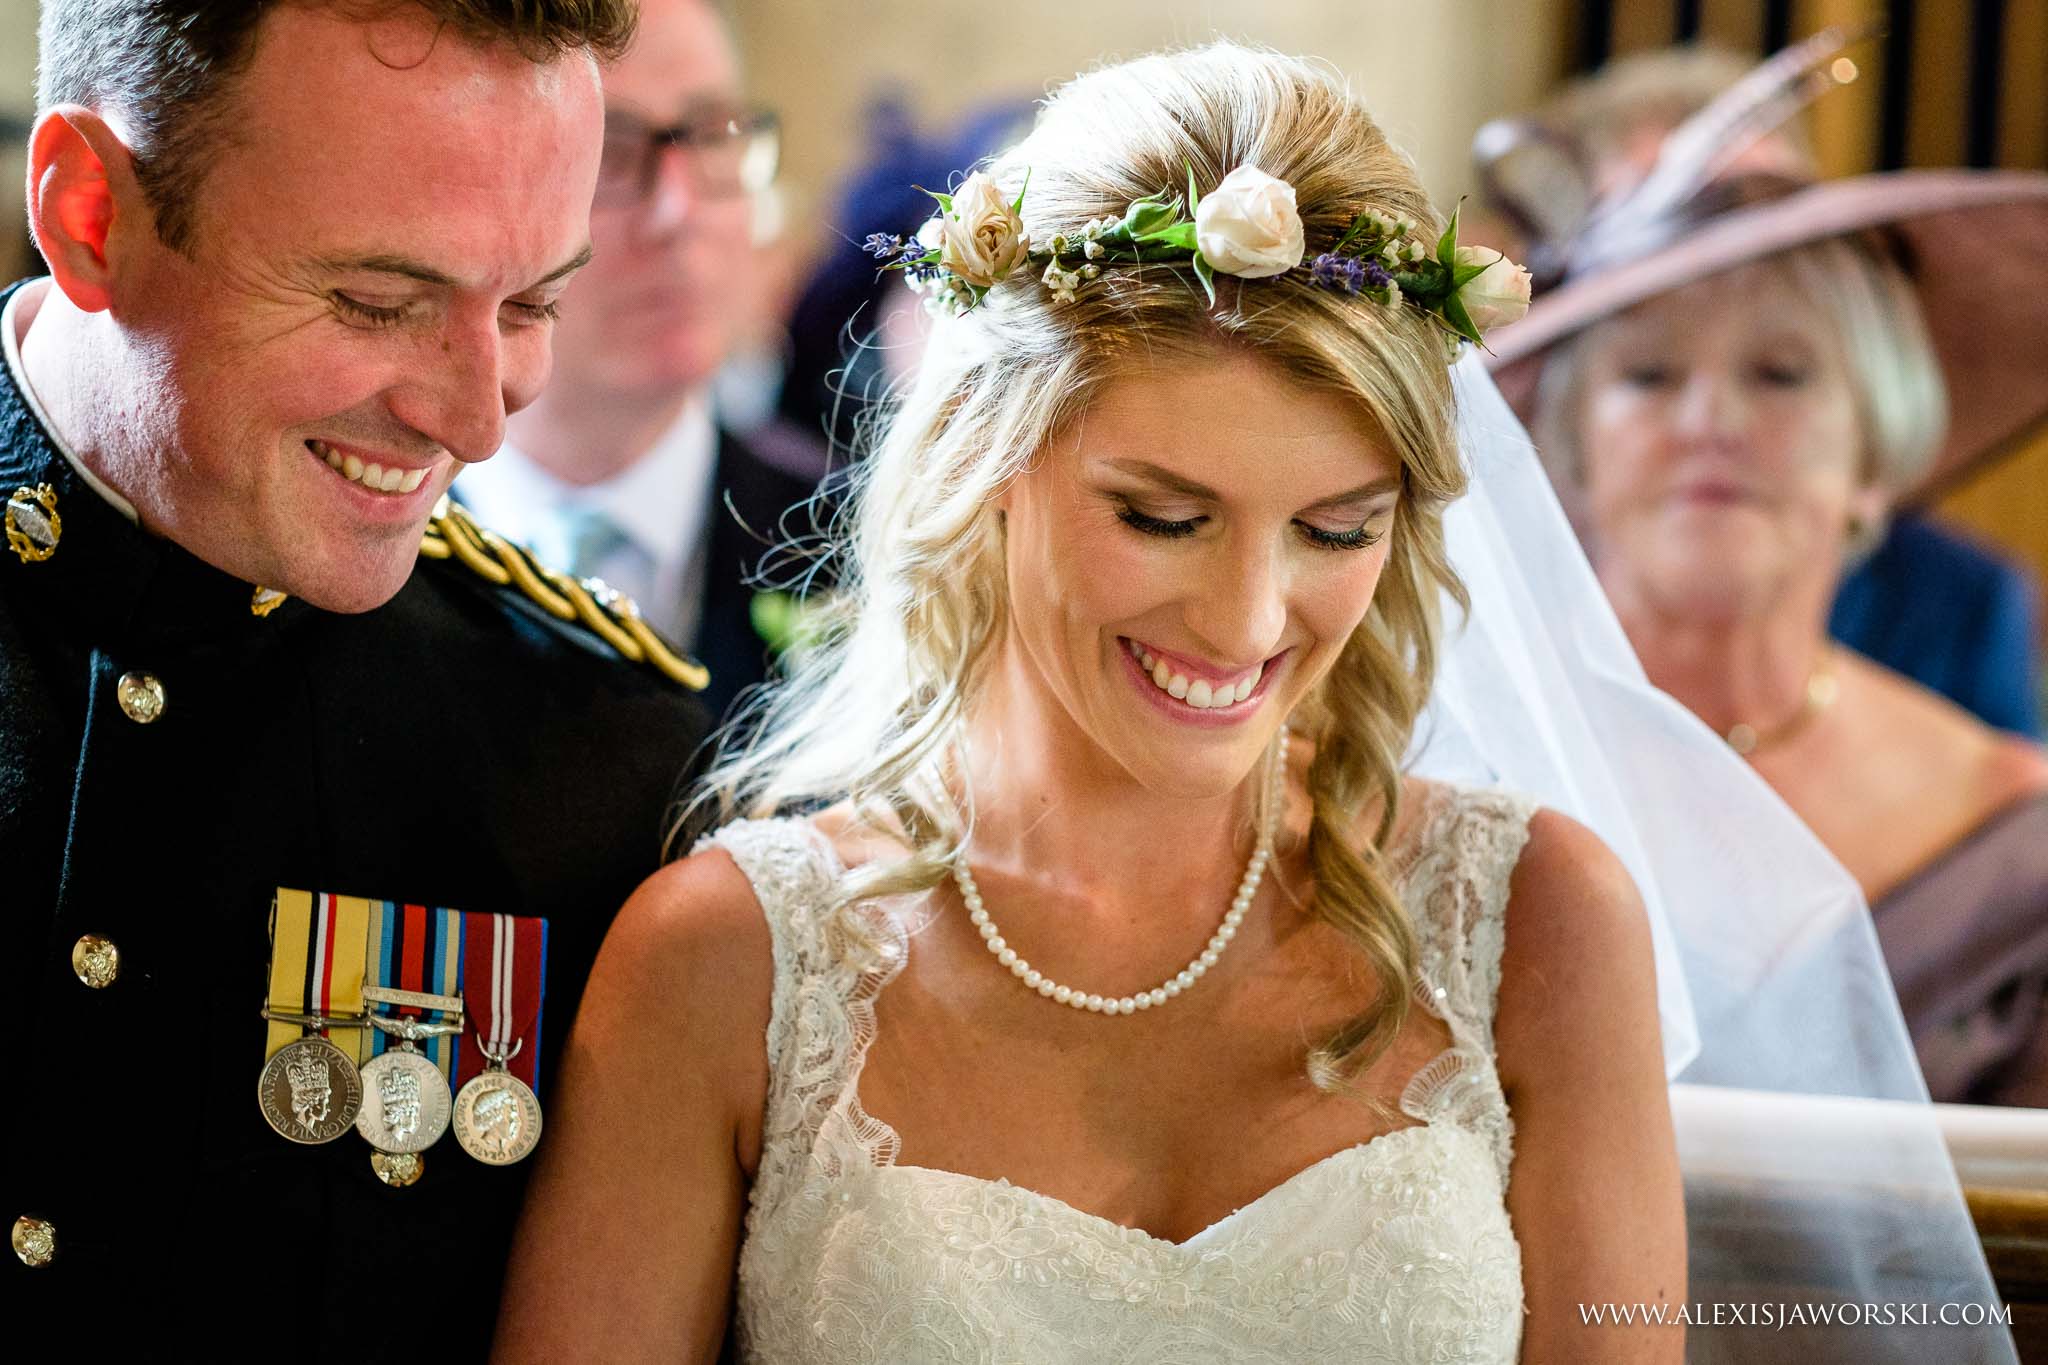 bride and groom smiling